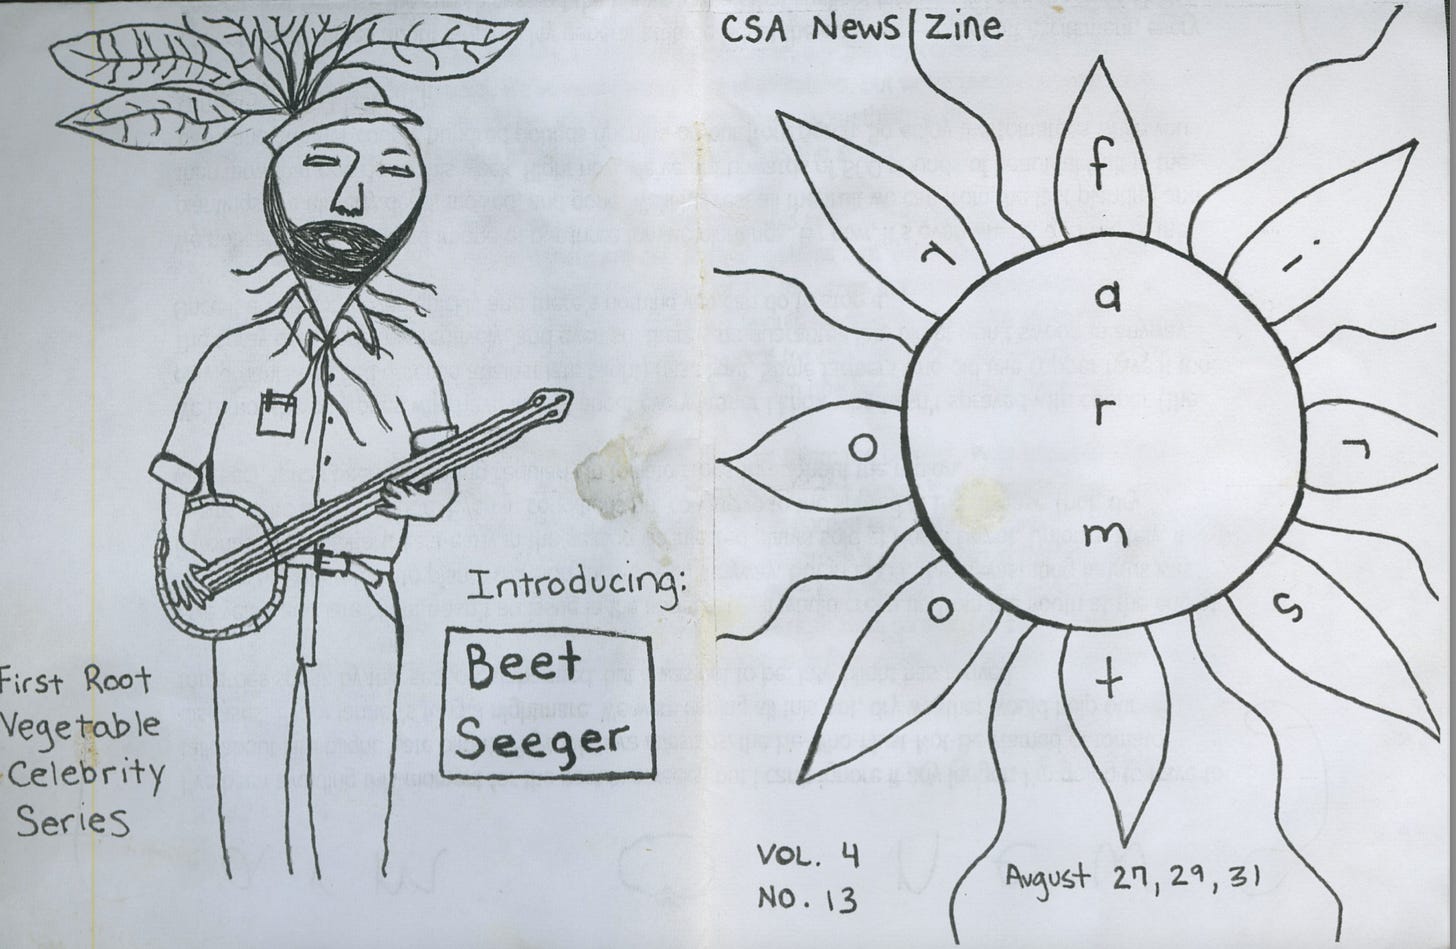 A scan of half a piece of paper, folded, with different images on each side. On the left, a drawing of Pete Seeger holding a banjo with beet leaves coming out of his head and a beard of beet roots, above the text ‘Introducing Beet Seeger’. On the right, a drawing of a sunflower with the words ‘First Root Farm’ written inside its petals, and ‘CSA News Zine, Vol. 4, No. 13’ on the top and bottom of the page.